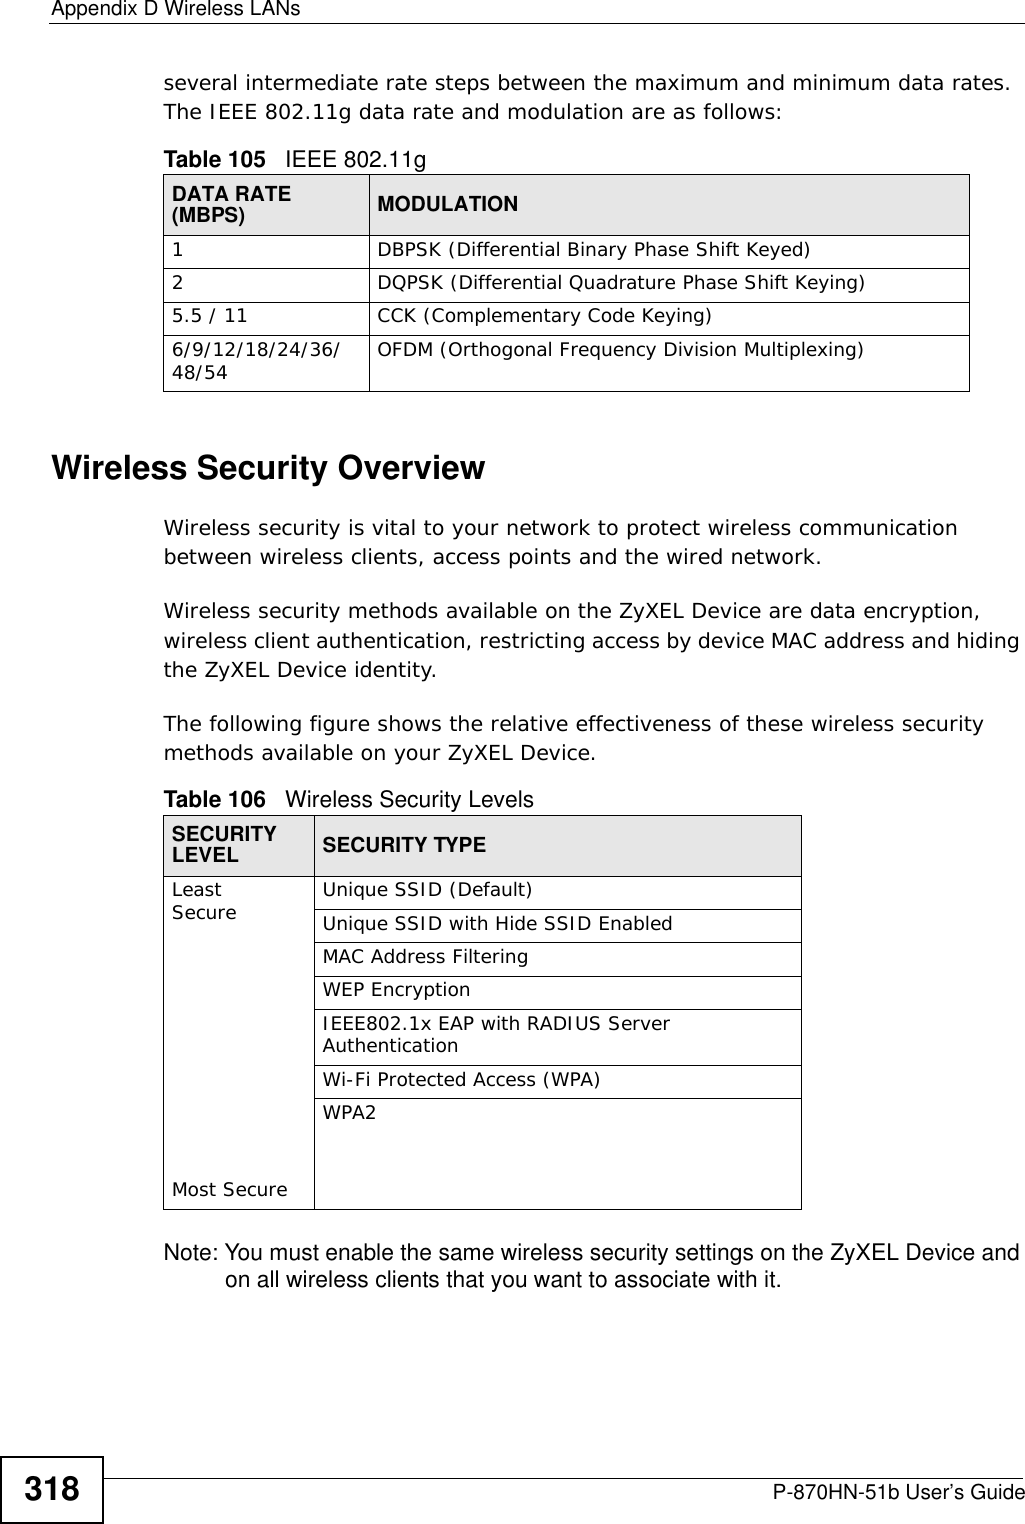 Appendix D Wireless LANsP-870HN-51b User’s Guide318several intermediate rate steps between the maximum and minimum data rates. The IEEE 802.11g data rate and modulation are as follows:Wireless Security OverviewWireless security is vital to your network to protect wireless communication between wireless clients, access points and the wired network.Wireless security methods available on the ZyXEL Device are data encryption, wireless client authentication, restricting access by device MAC address and hiding the ZyXEL Device identity.The following figure shows the relative effectiveness of these wireless security methods available on your ZyXEL Device.Note: You must enable the same wireless security settings on the ZyXEL Device and on all wireless clients that you want to associate with it. Table 105   IEEE 802.11gDATA RATE (MBPS) MODULATION1 DBPSK (Differential Binary Phase Shift Keyed)2 DQPSK (Differential Quadrature Phase Shift Keying)5.5 / 11 CCK (Complementary Code Keying) 6/9/12/18/24/36/48/54 OFDM (Orthogonal Frequency Division Multiplexing) Table 106   Wireless Security LevelsSECURITY LEVEL SECURITY TYPELeast       Secure                                                                                  Most SecureUnique SSID (Default)Unique SSID with Hide SSID EnabledMAC Address FilteringWEP EncryptionIEEE802.1x EAP with RADIUS Server AuthenticationWi-Fi Protected Access (WPA)WPA2